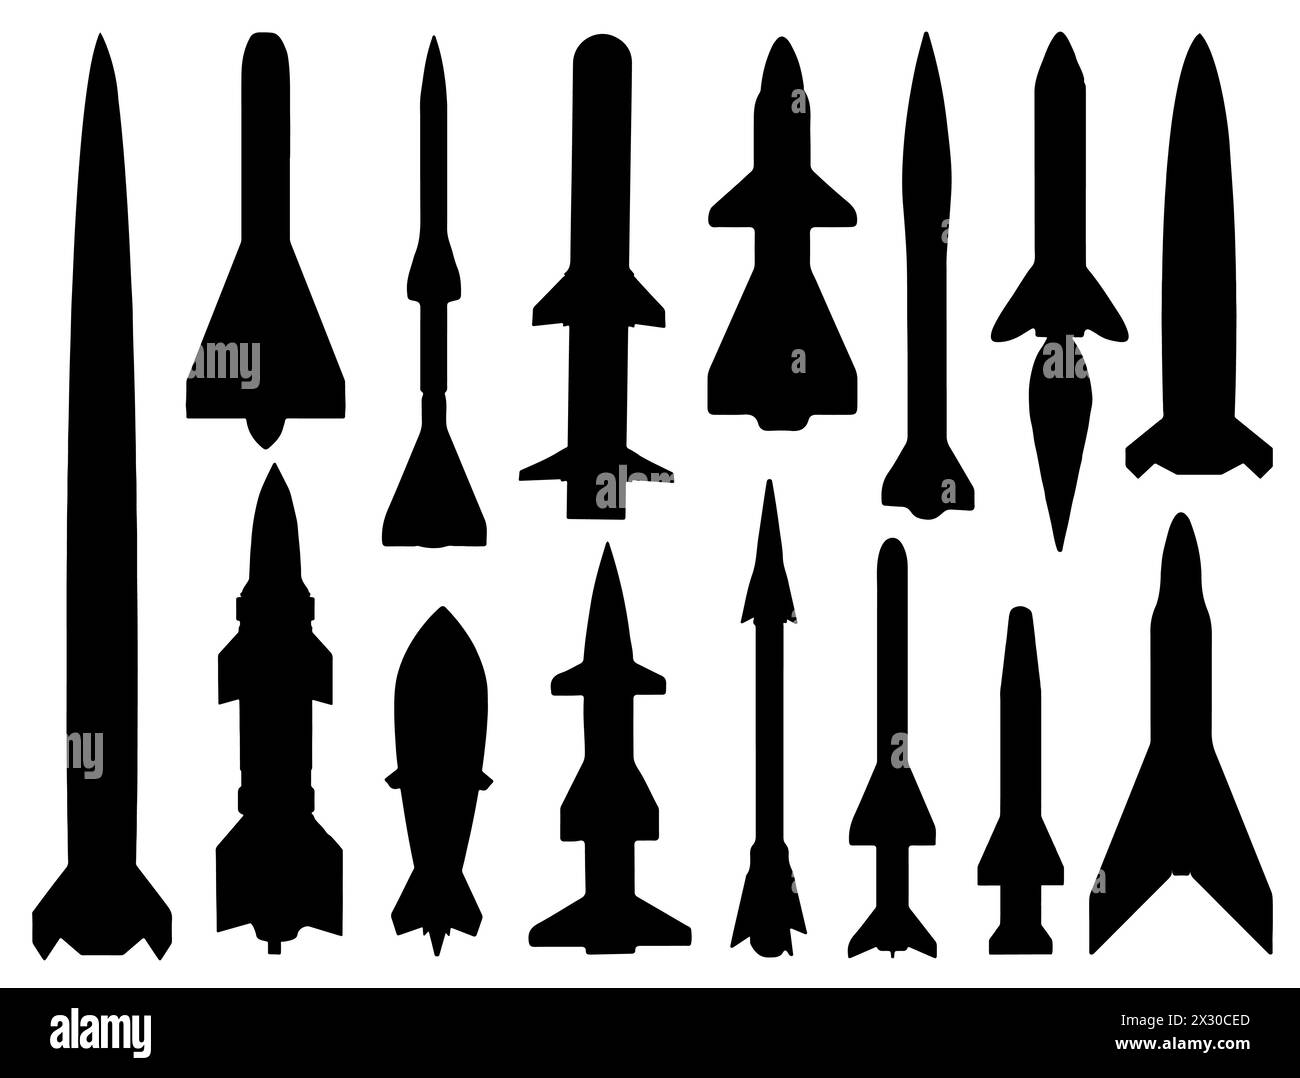 Military missile silhouette vector art Stock Vector